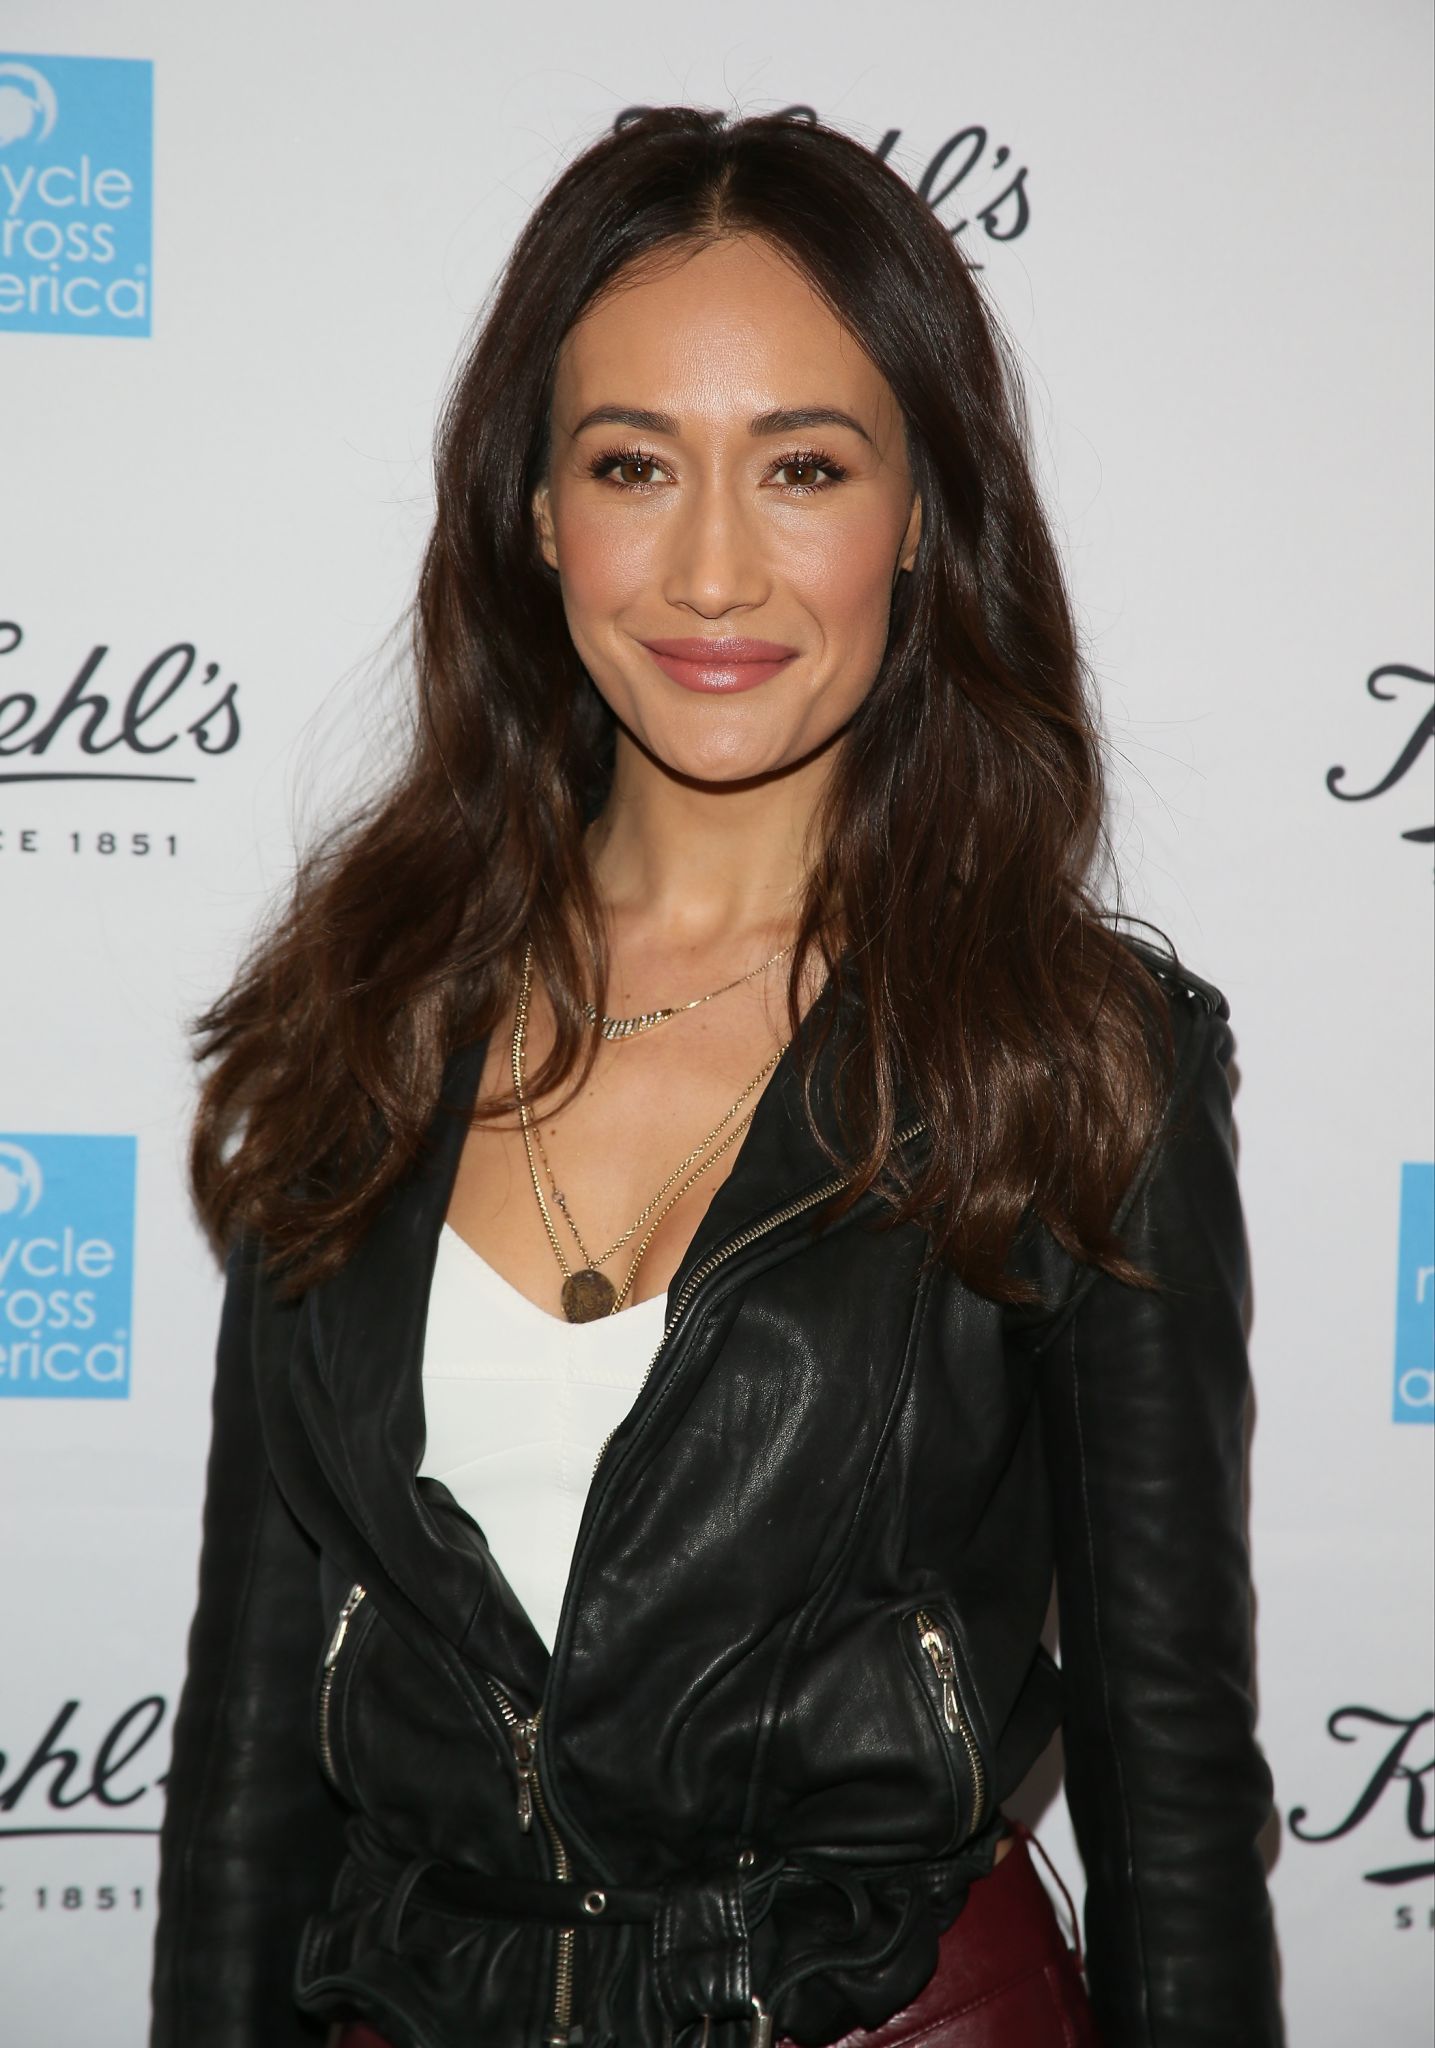 Maggie Q attends Kiehl’s 2015 Earth Day Project